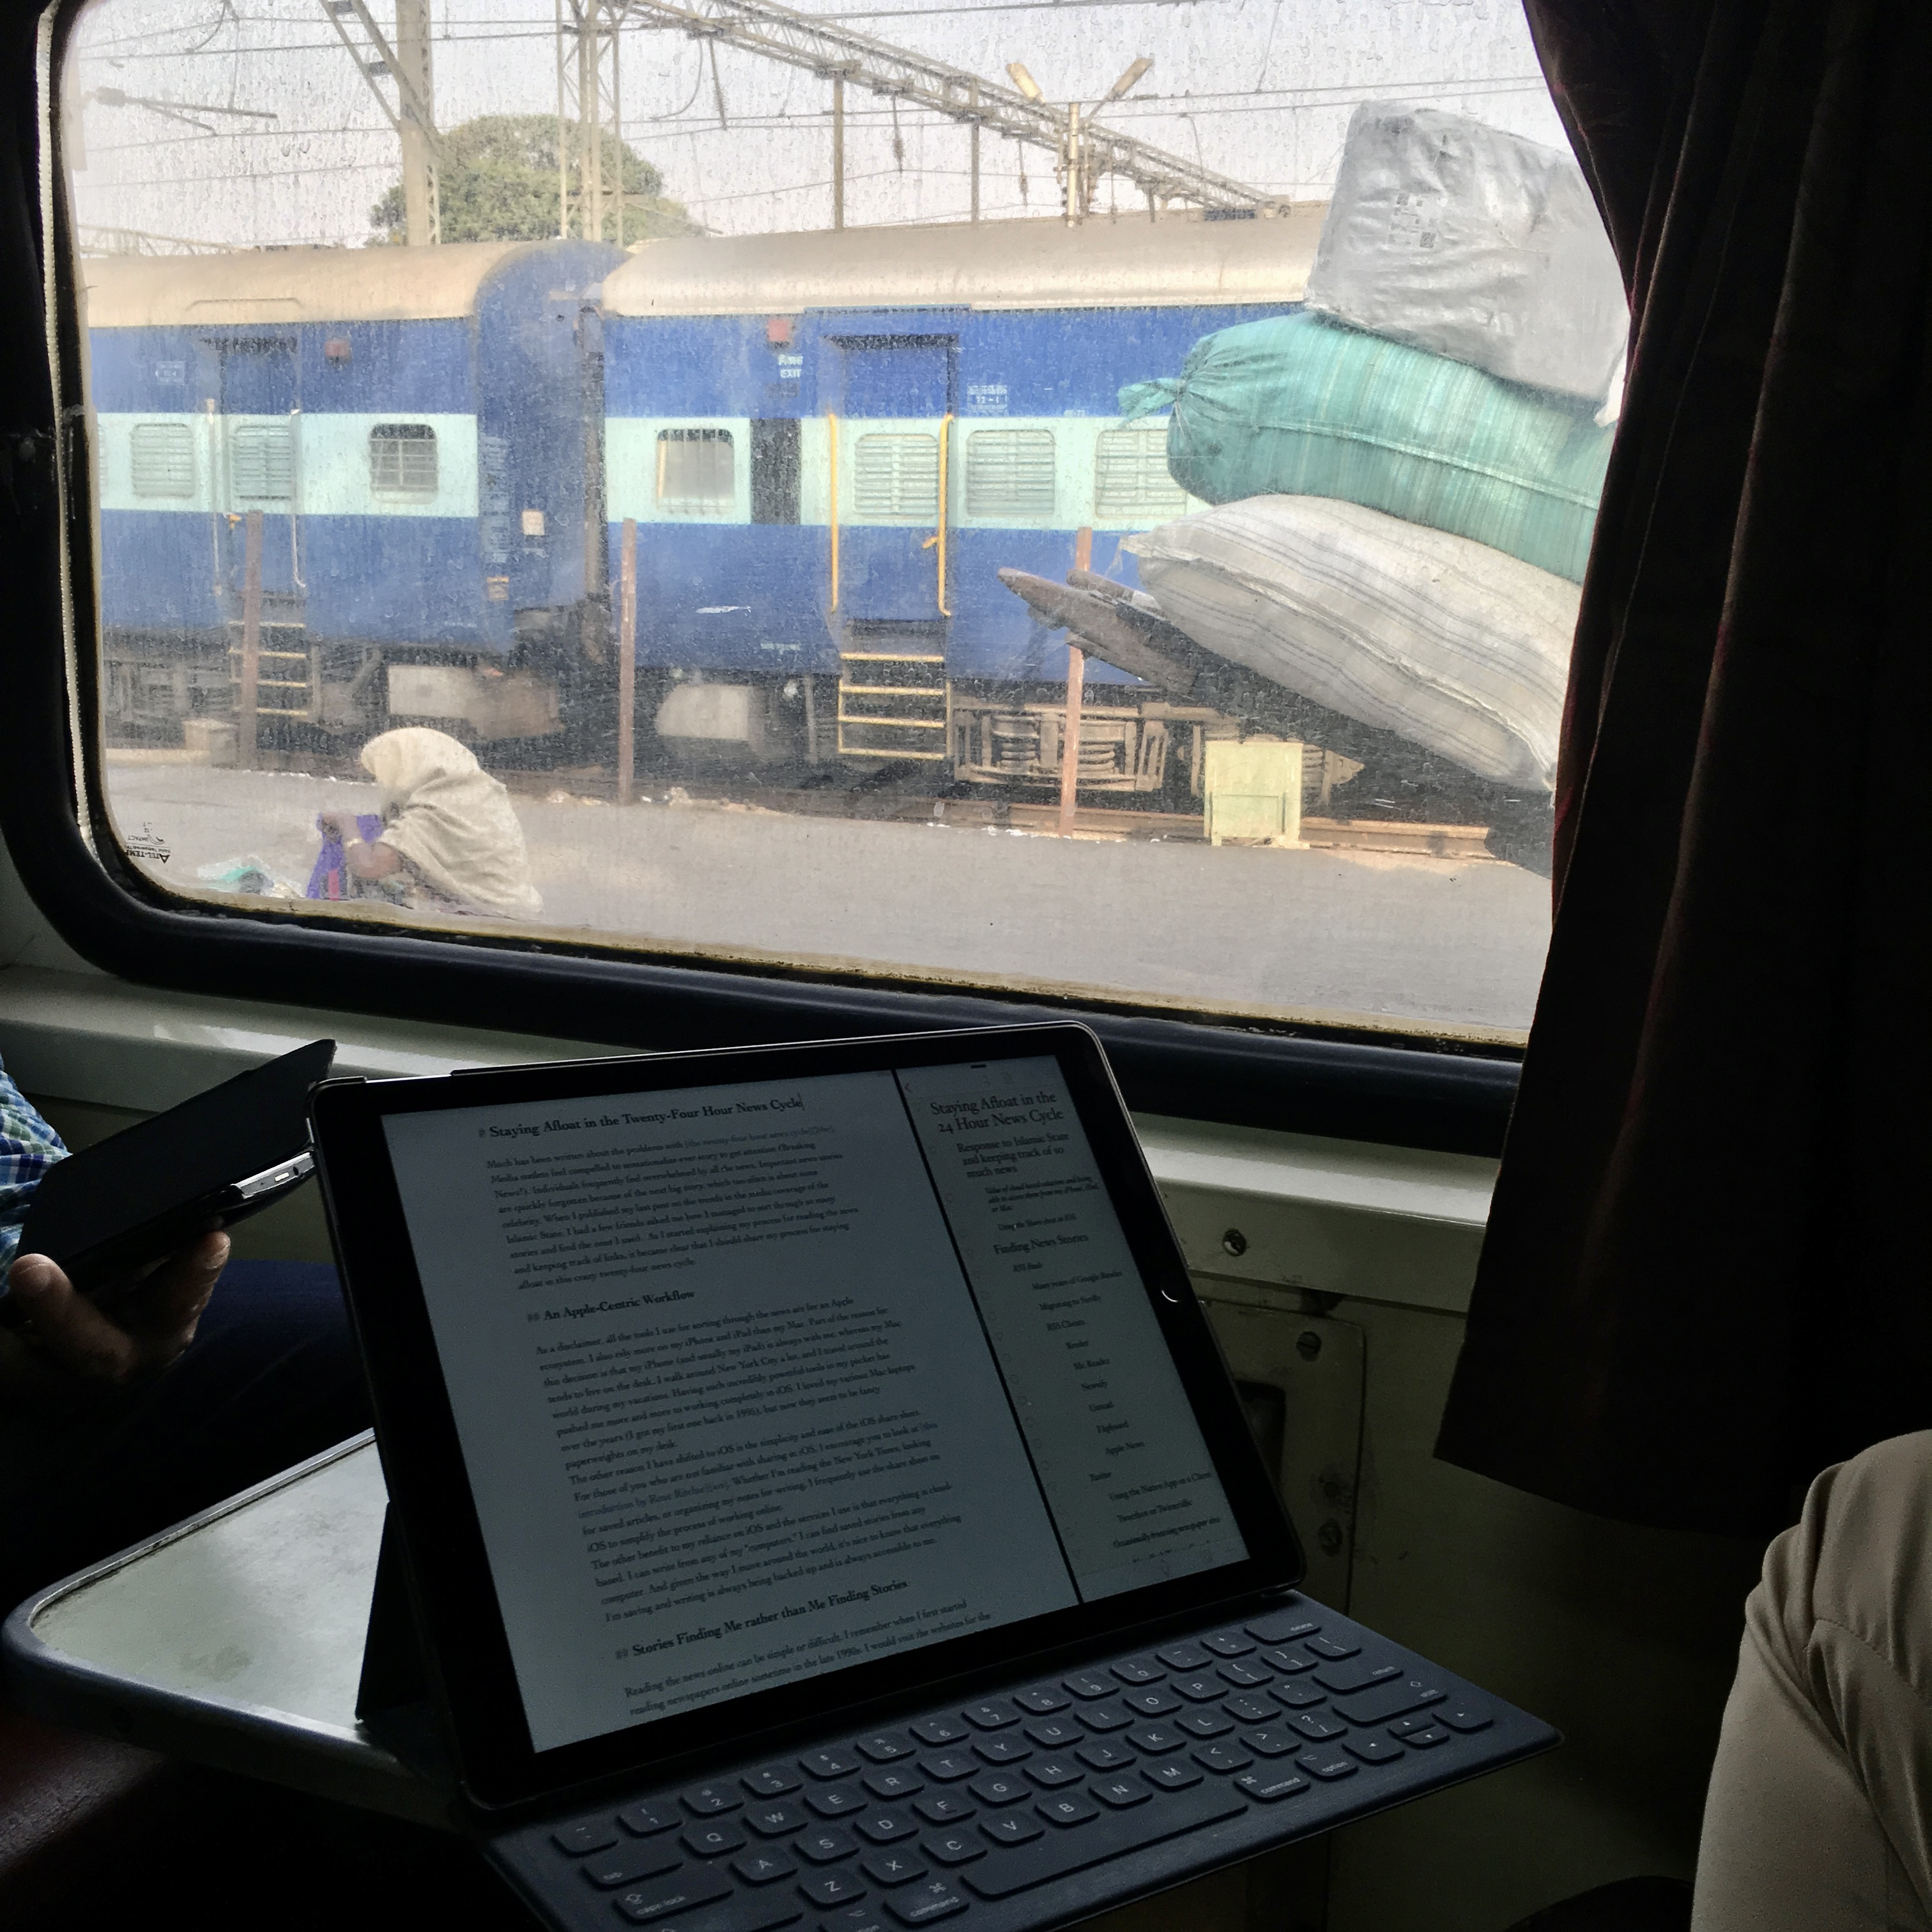 Writing on a train in India in 2016